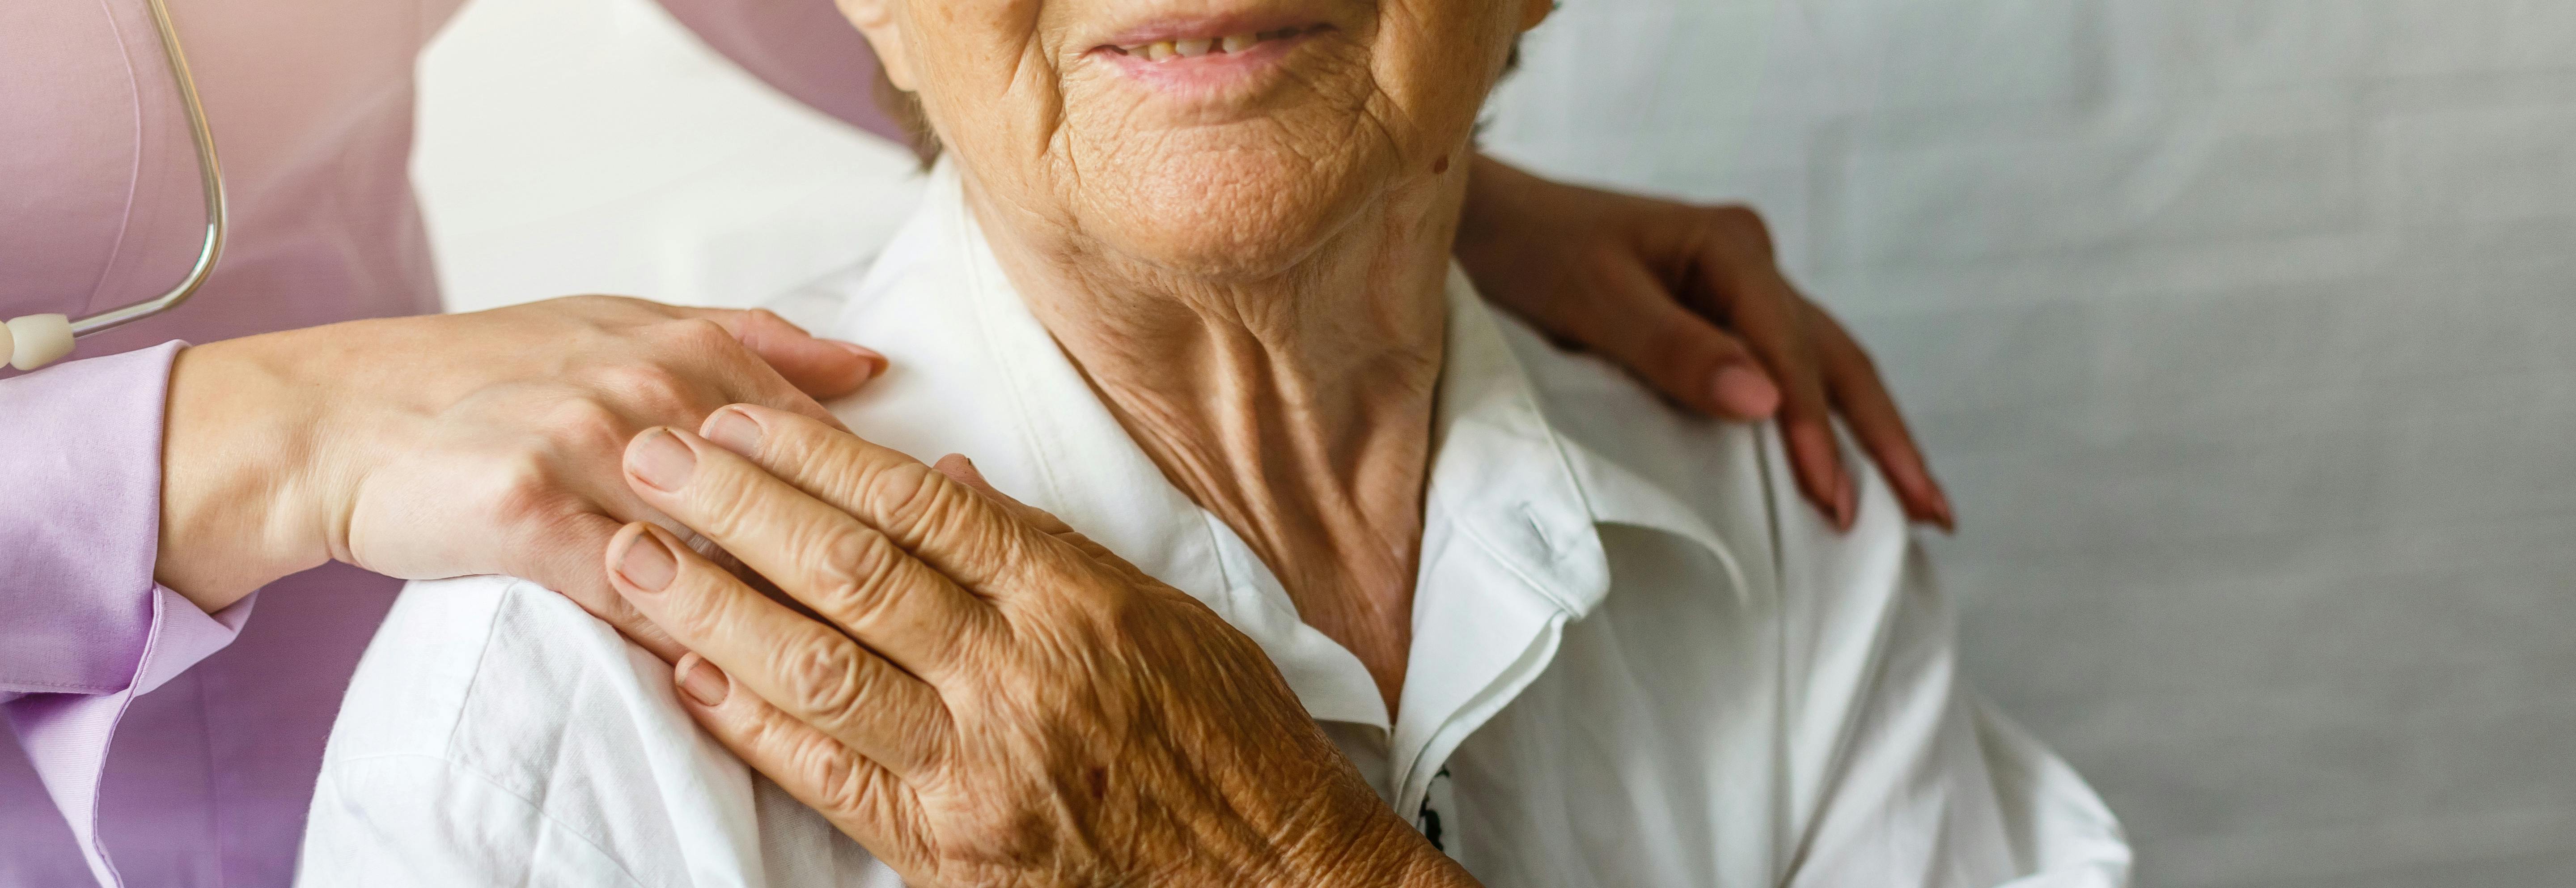 Elderly woman receiving care from a health professional